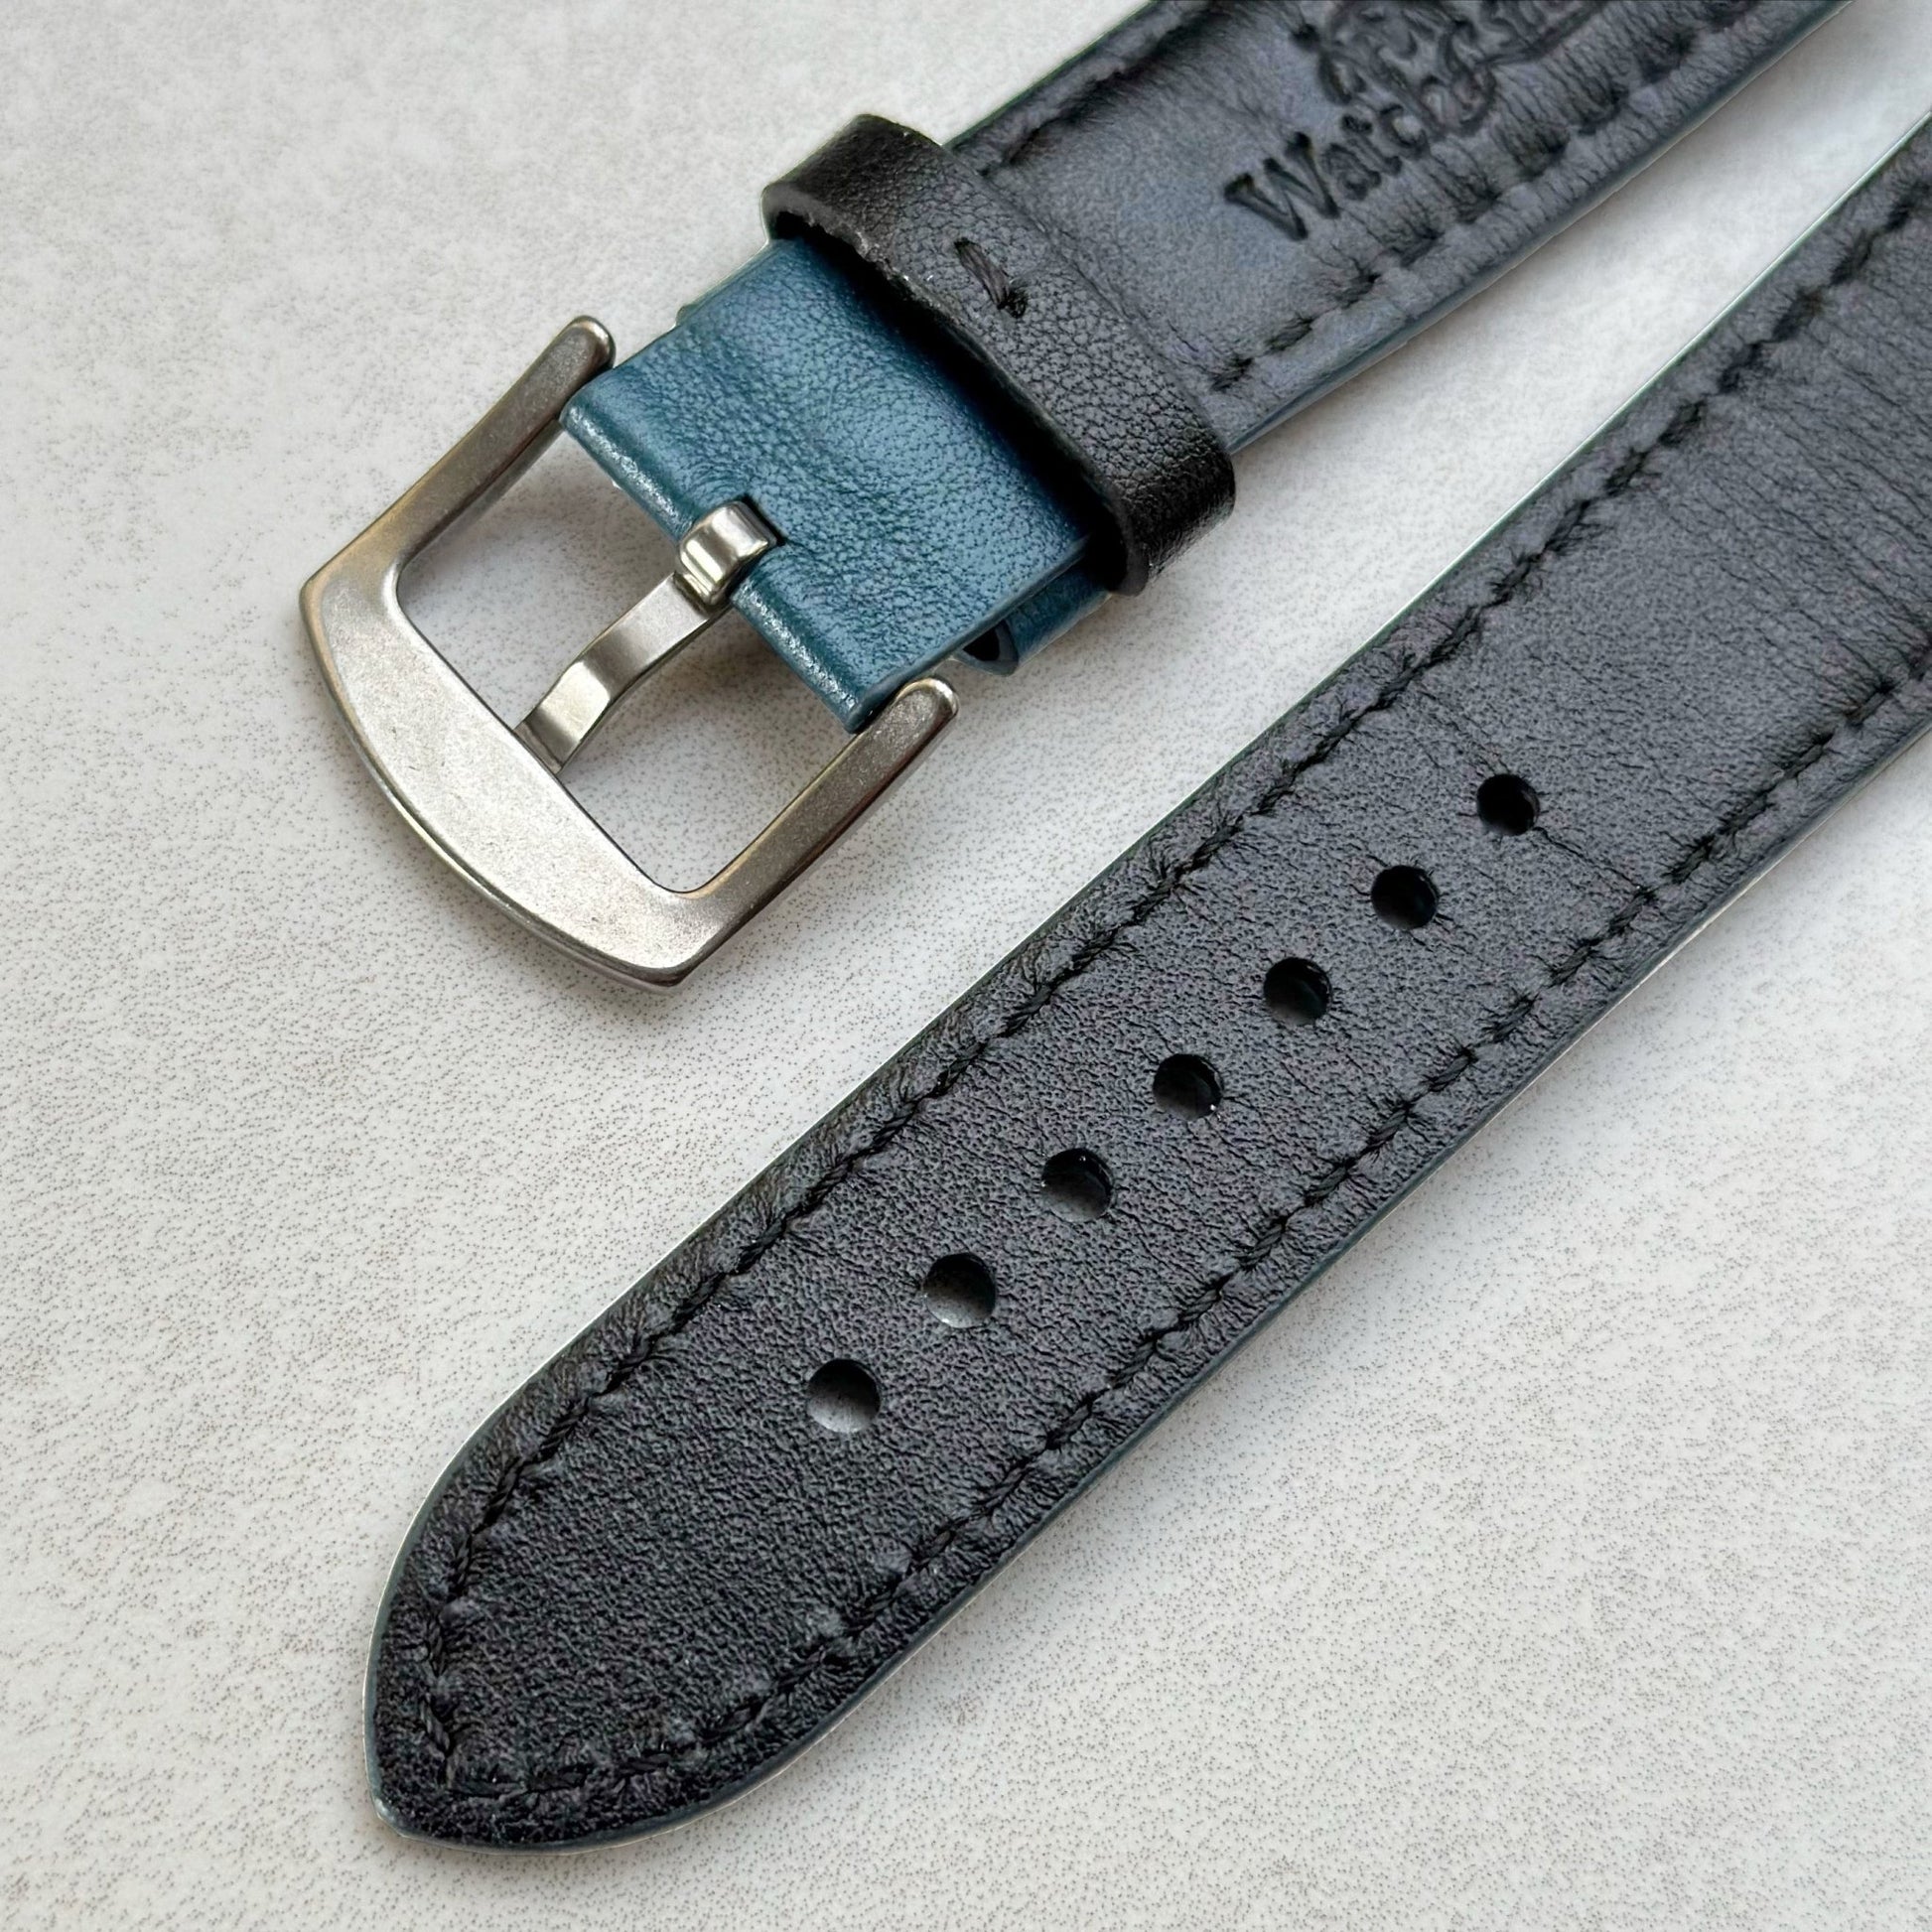 Rear bottom of the Le Mans blue and black full grain leather watch strap. Underside of the 316L stainless steel buckle.